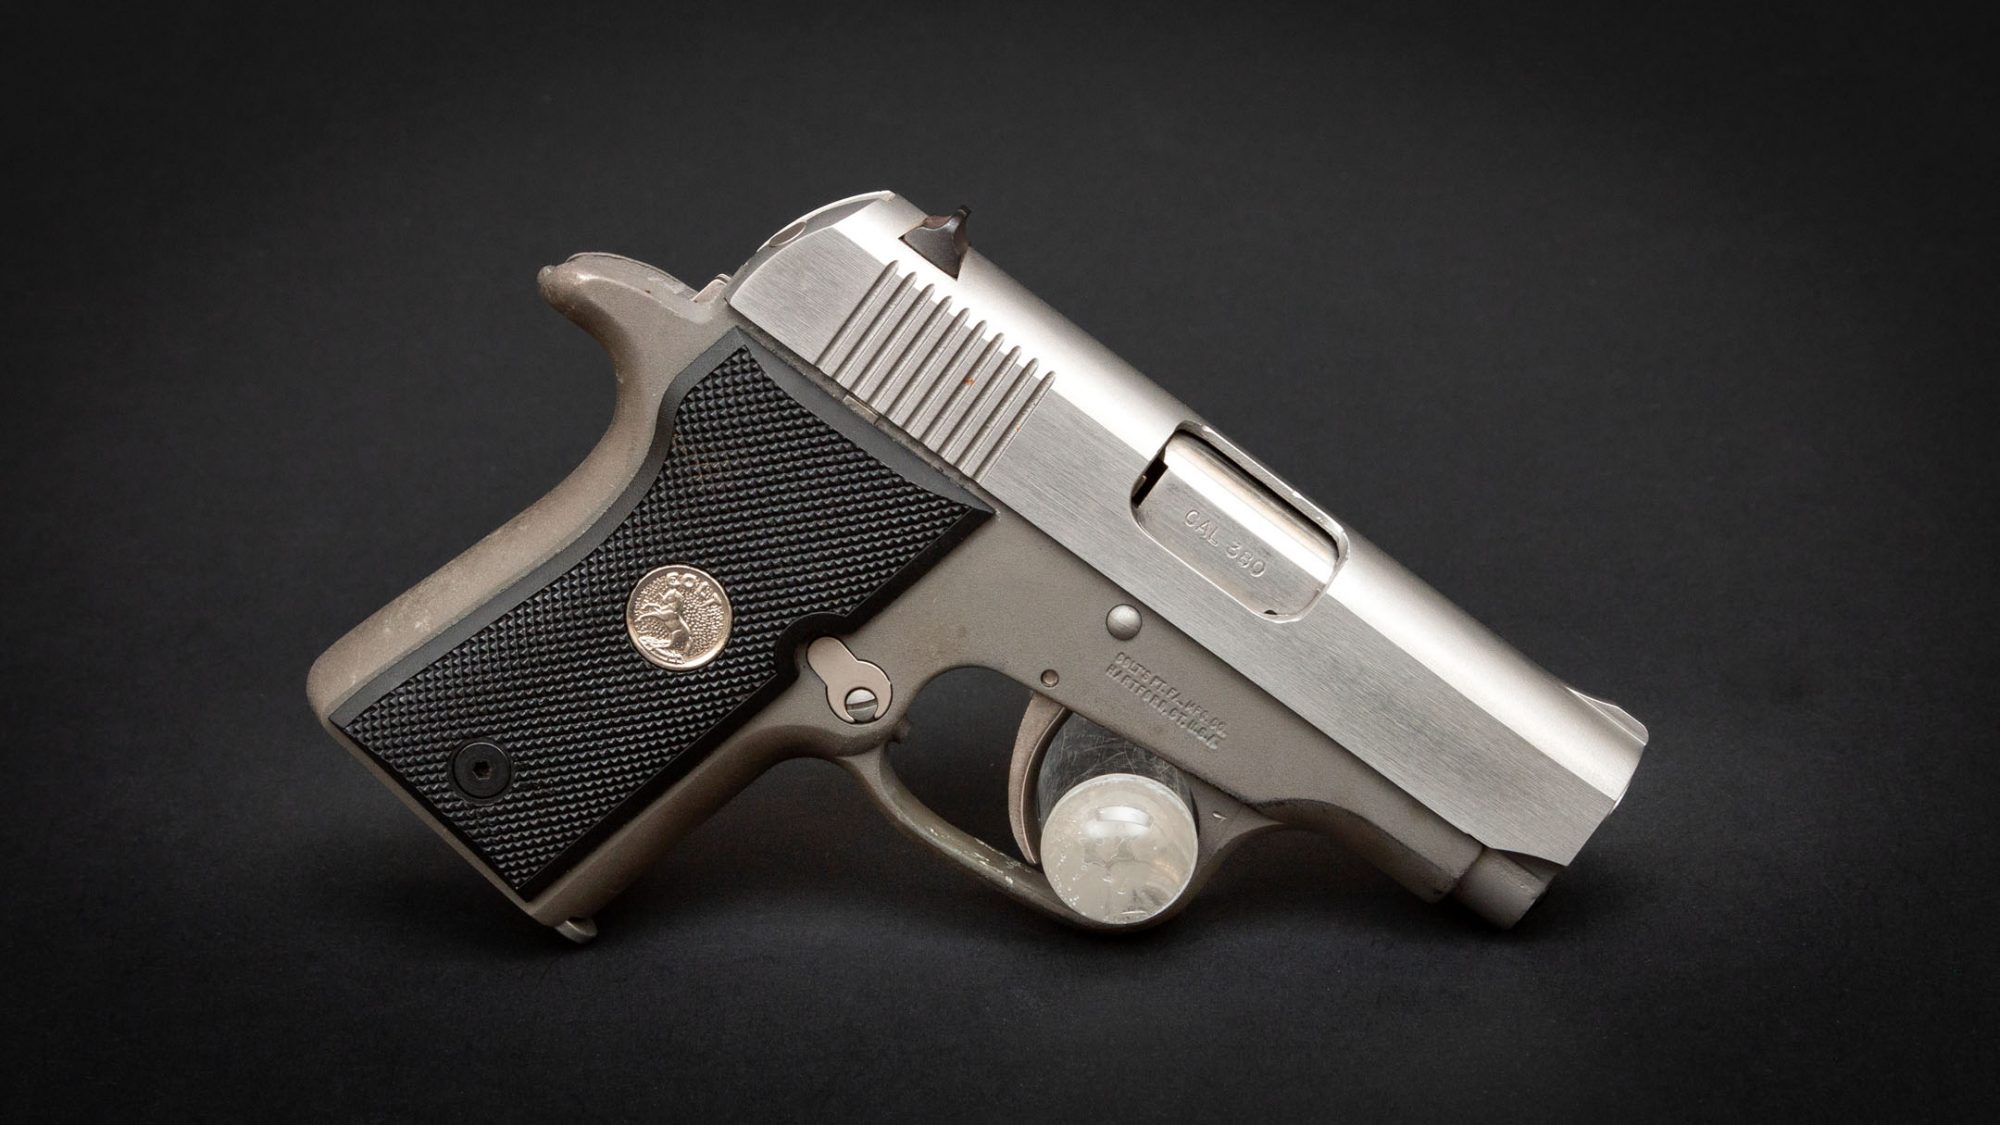 Colt Pony Pocketlite in 380 ACP, for sale by Turnbull Restoration Co. of Bloomfield, NY